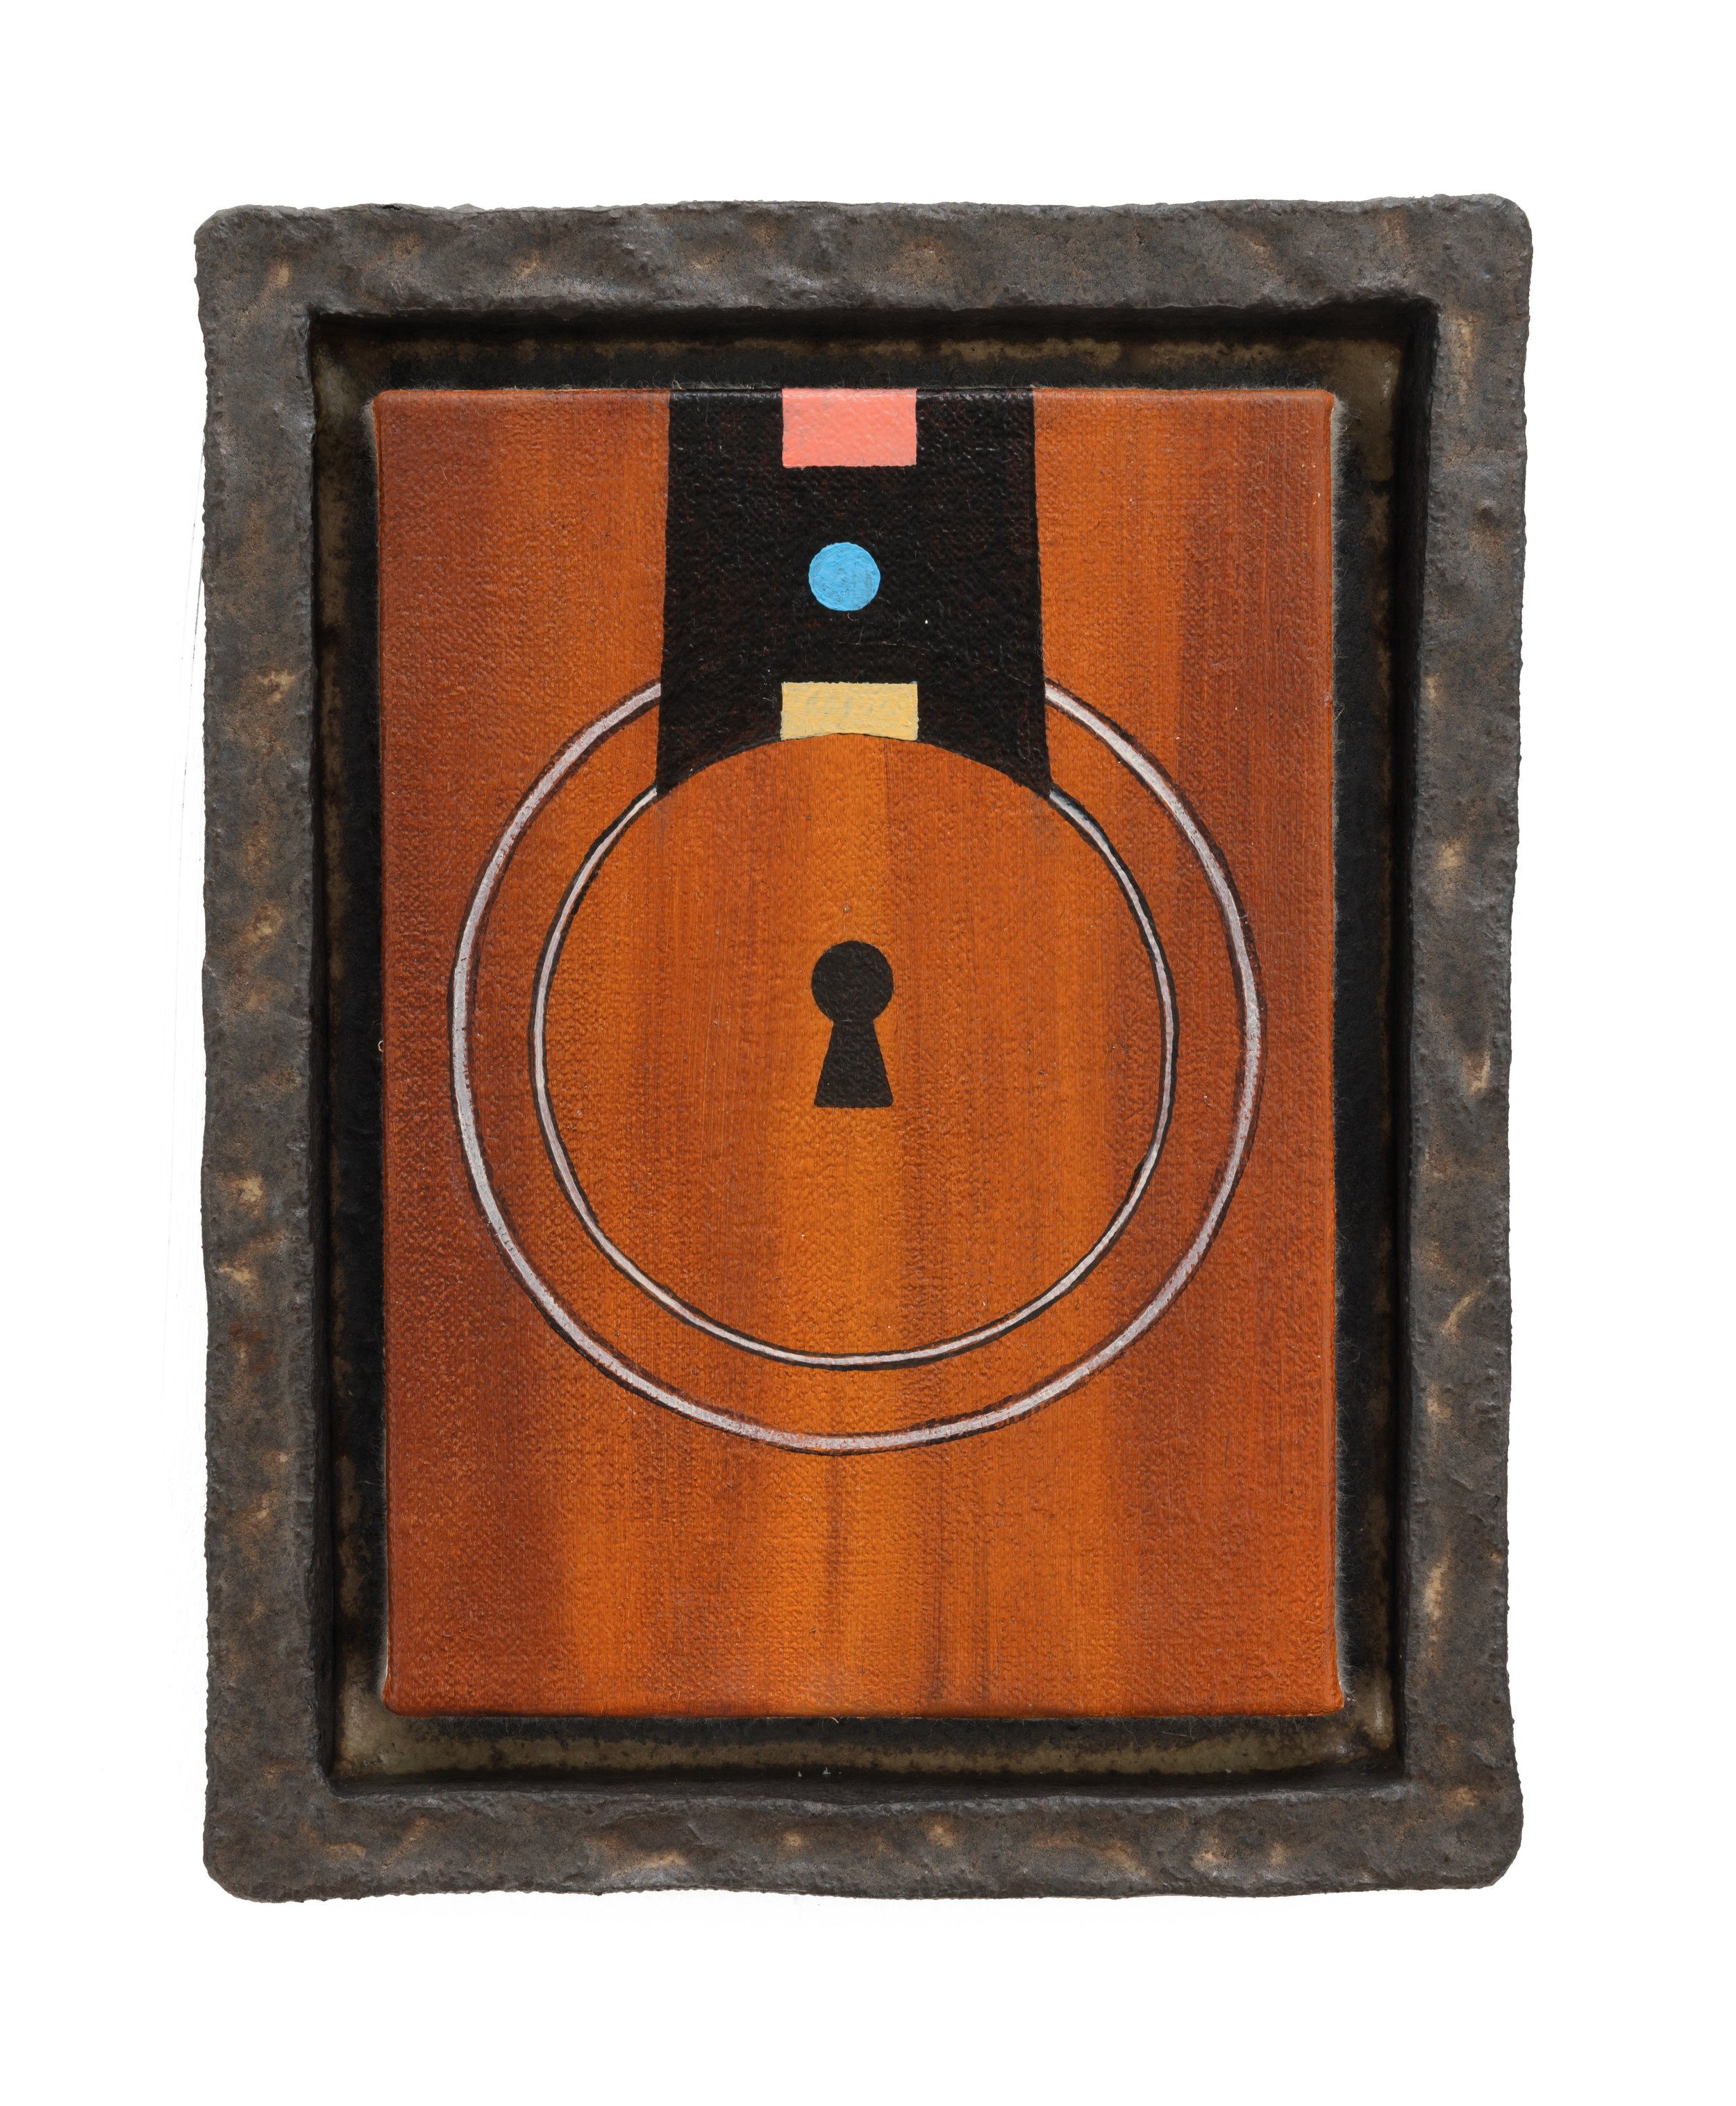 KEY | 8.5 x 6.5 inches / 21.6 x 16.5 cm, oil on linen in stoneware frame, 2023